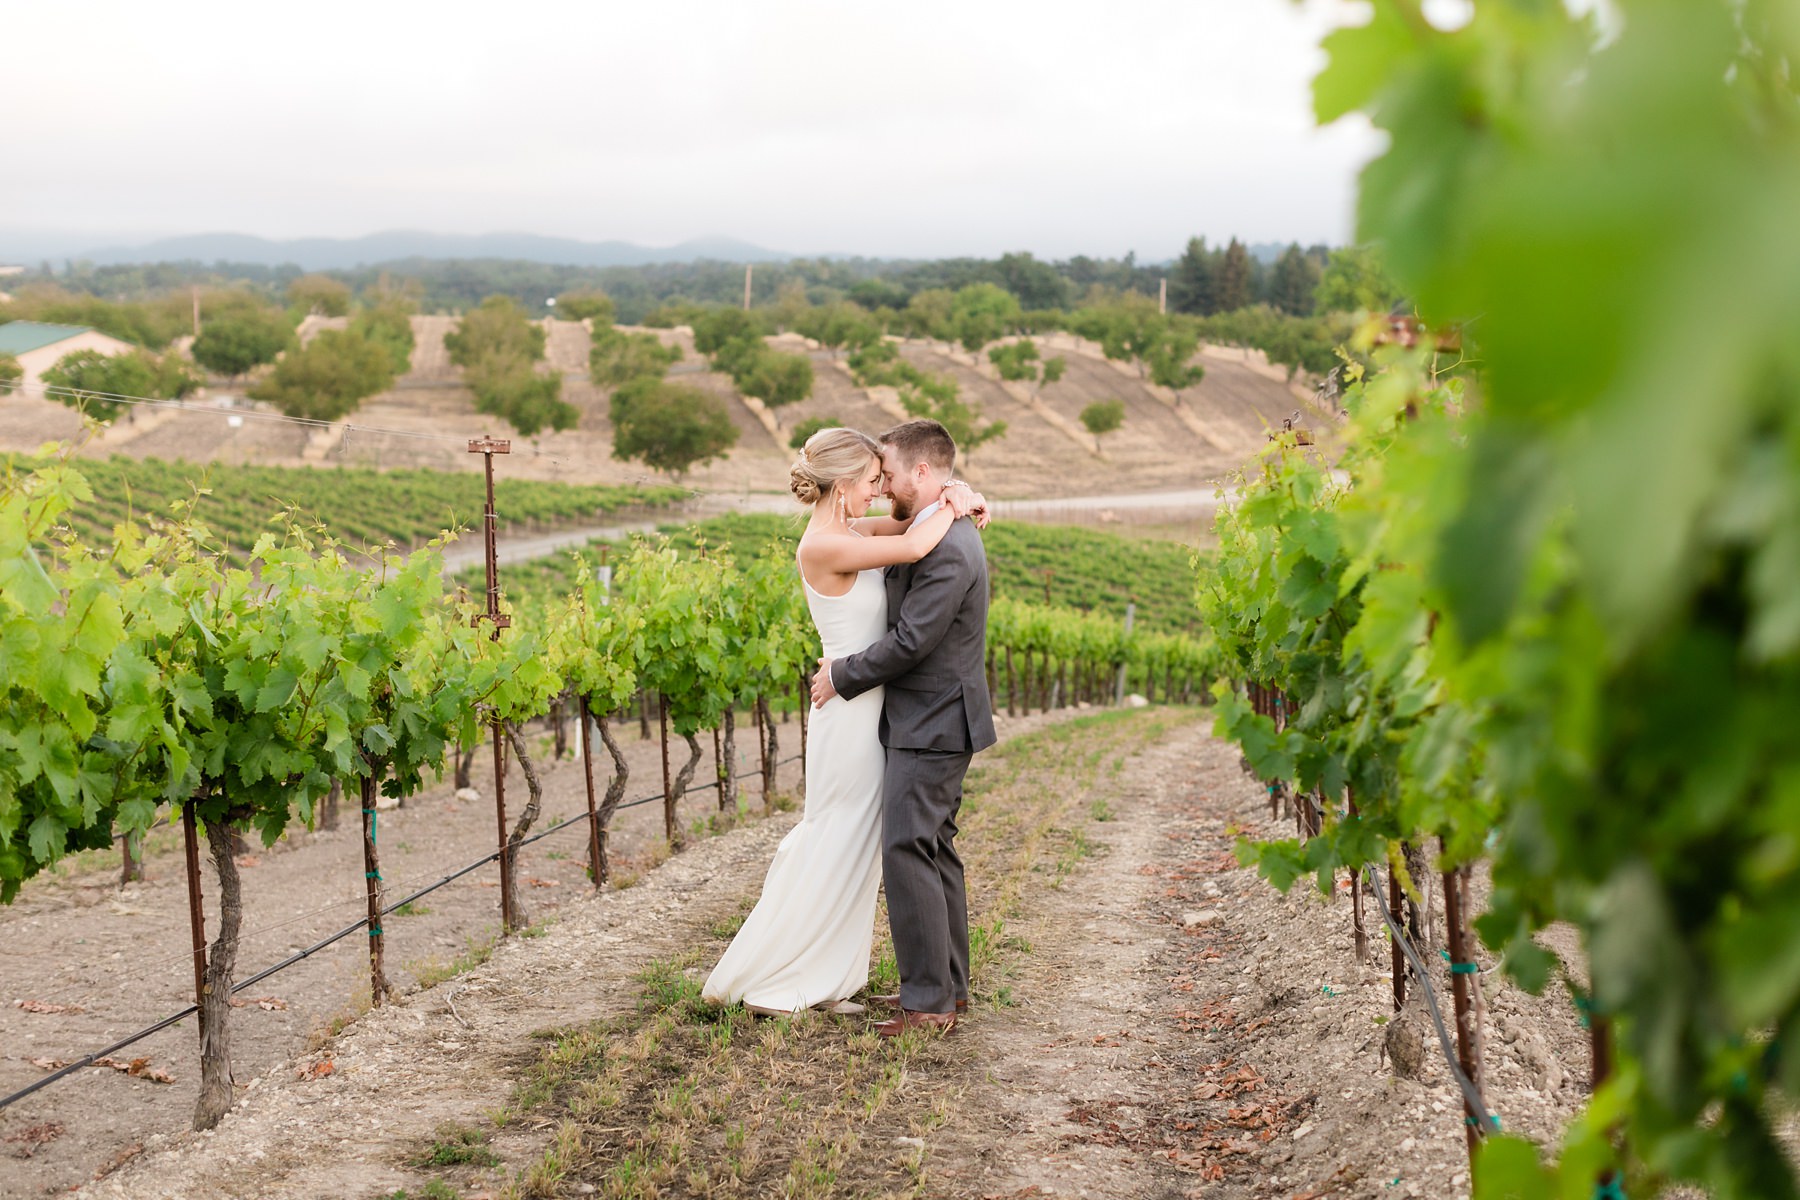 Bride and groom embrace and laugh in the vineyards at their foggy hilltop winery wedding in paso robles, california